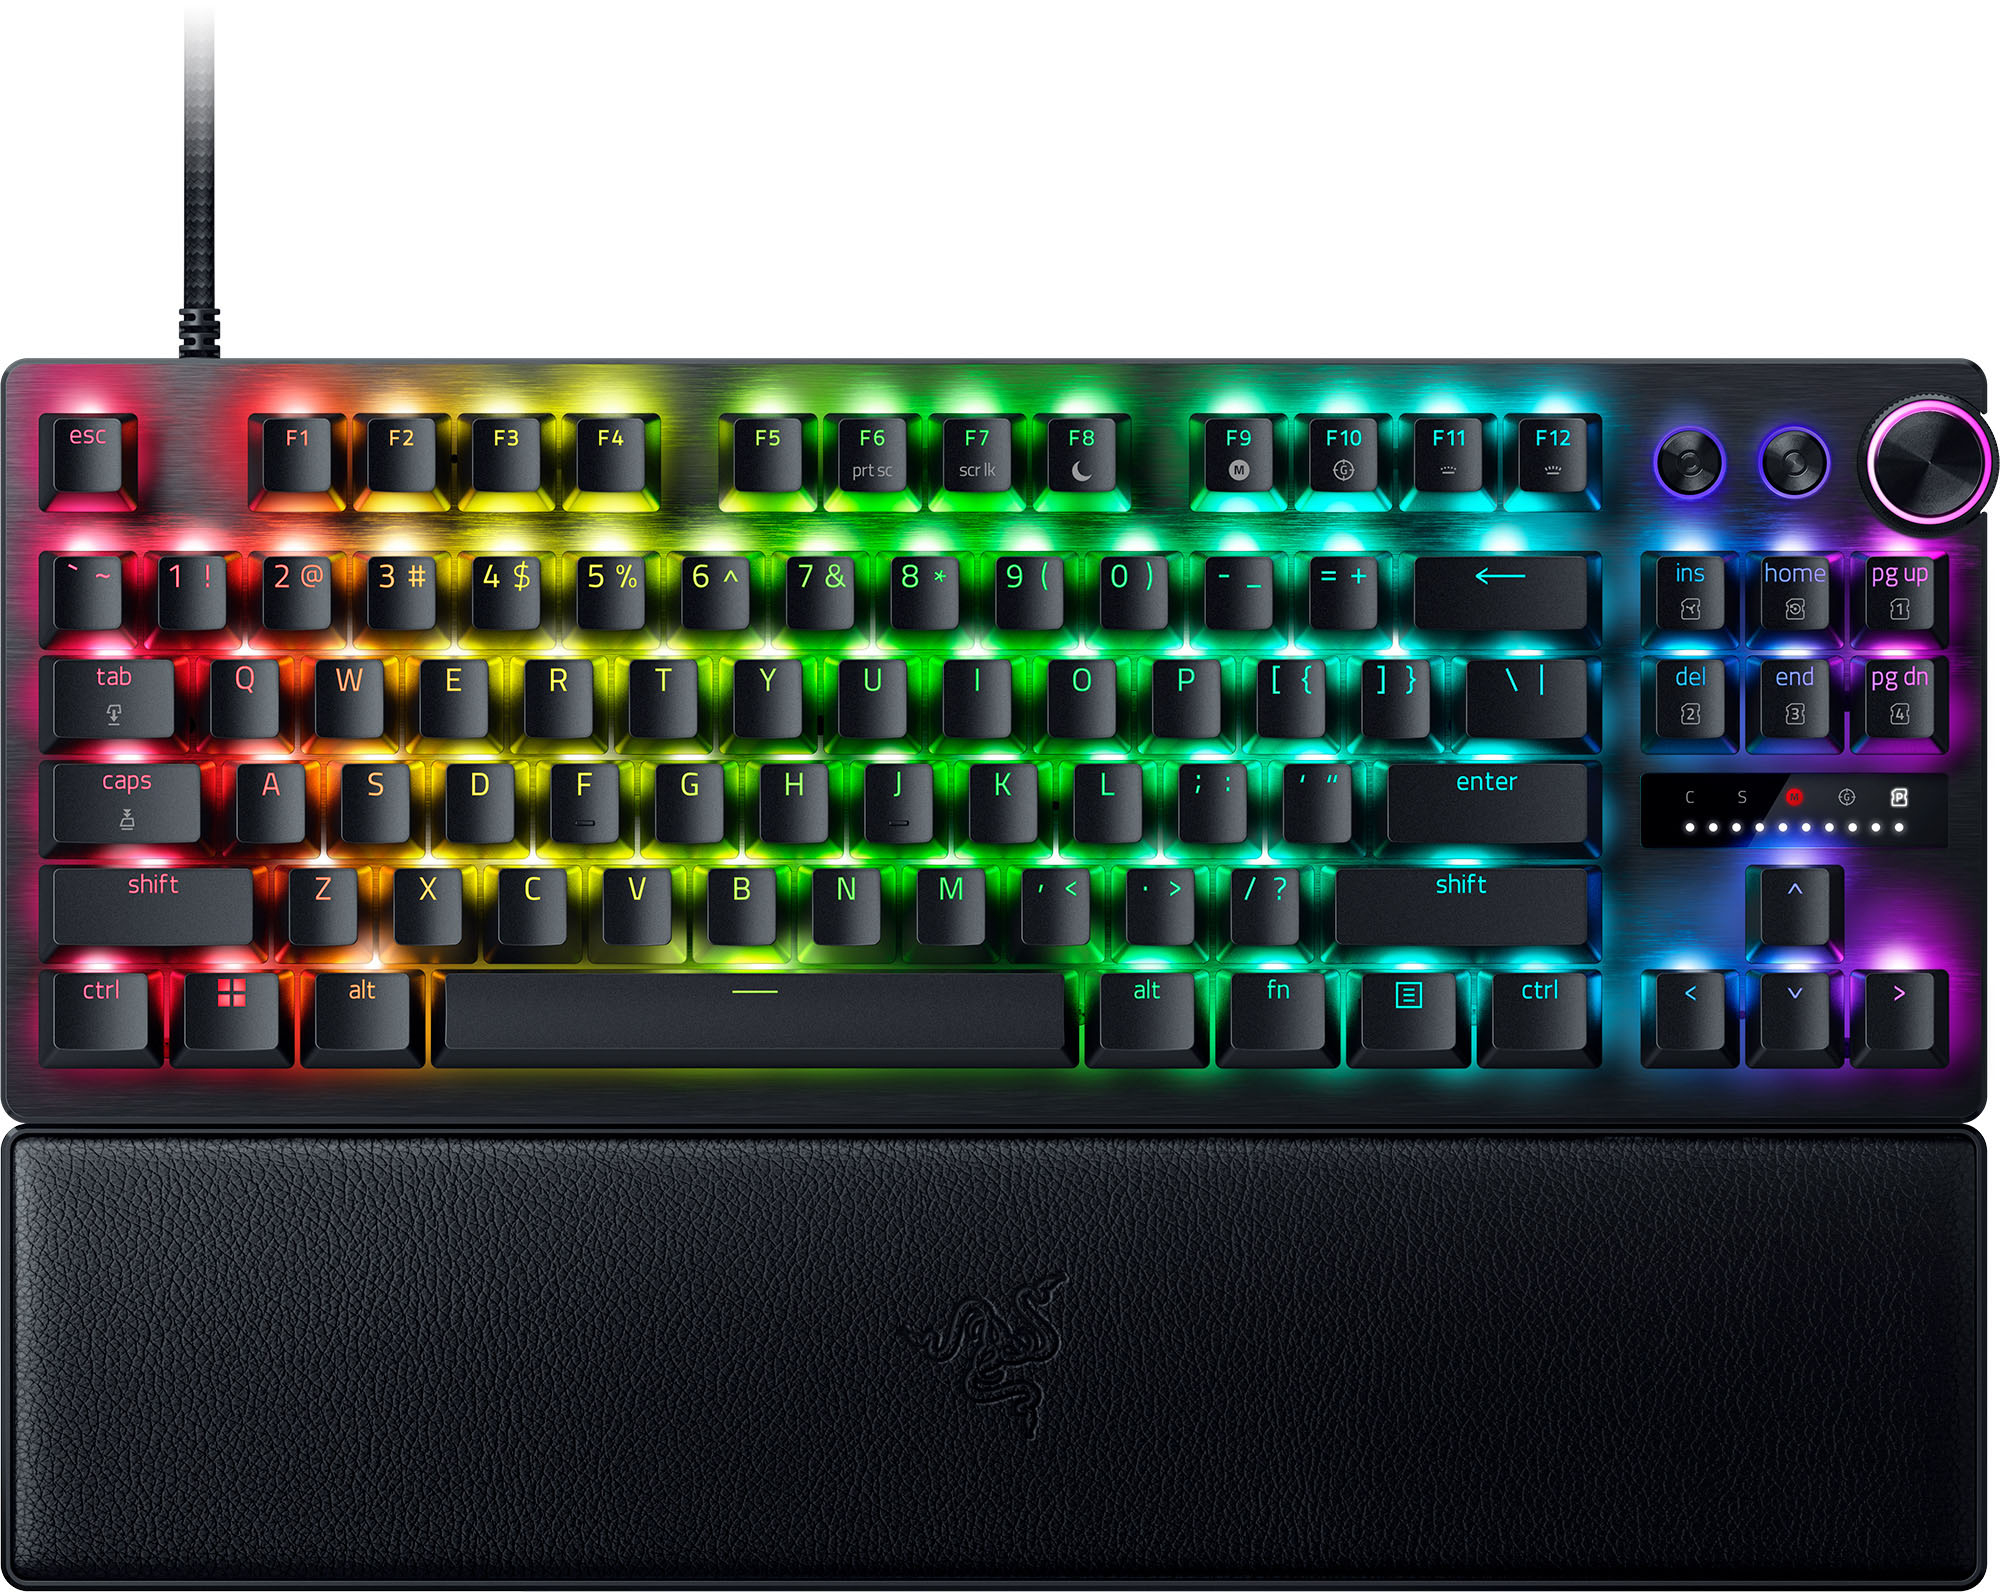 Razer's Black Friday deals knock up to 65 percent off gaming peripherals